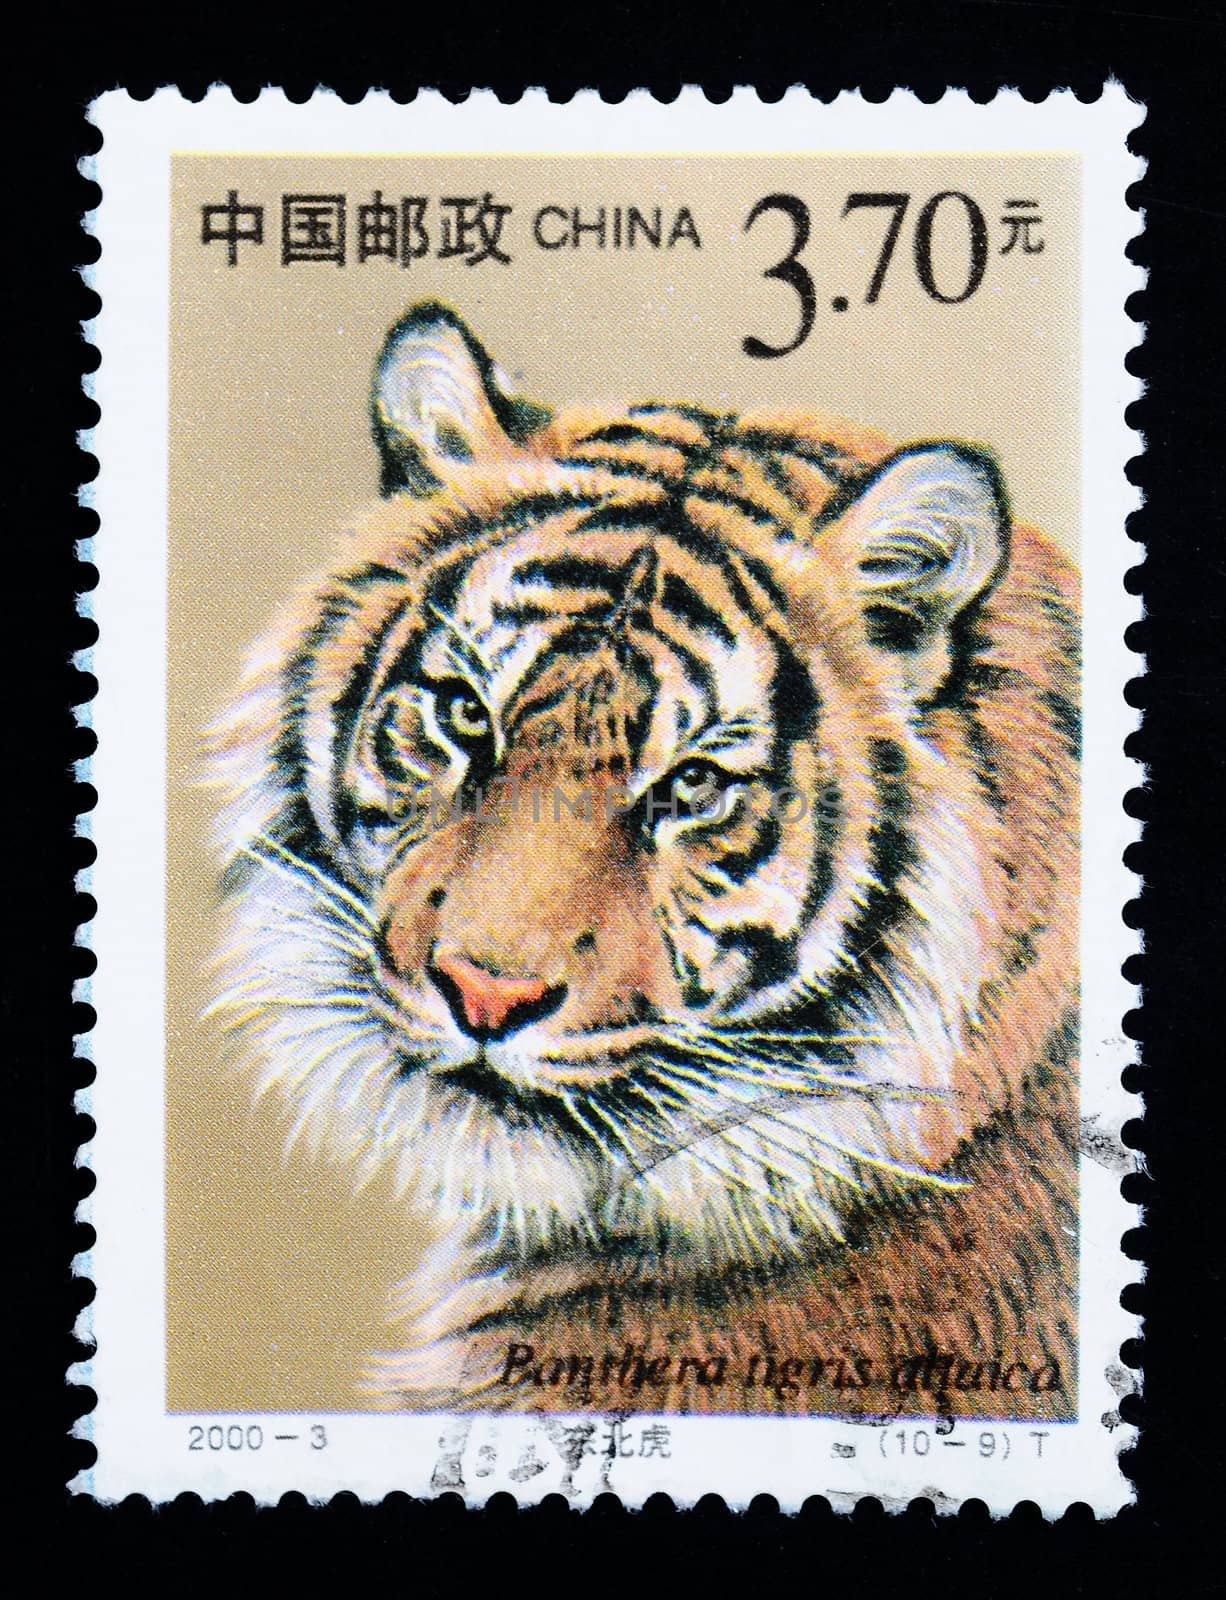 CHINA - CIRCA 2000: A stamp printed in China shows Panthera tigris altaica, series, circa 2000  by bbbar